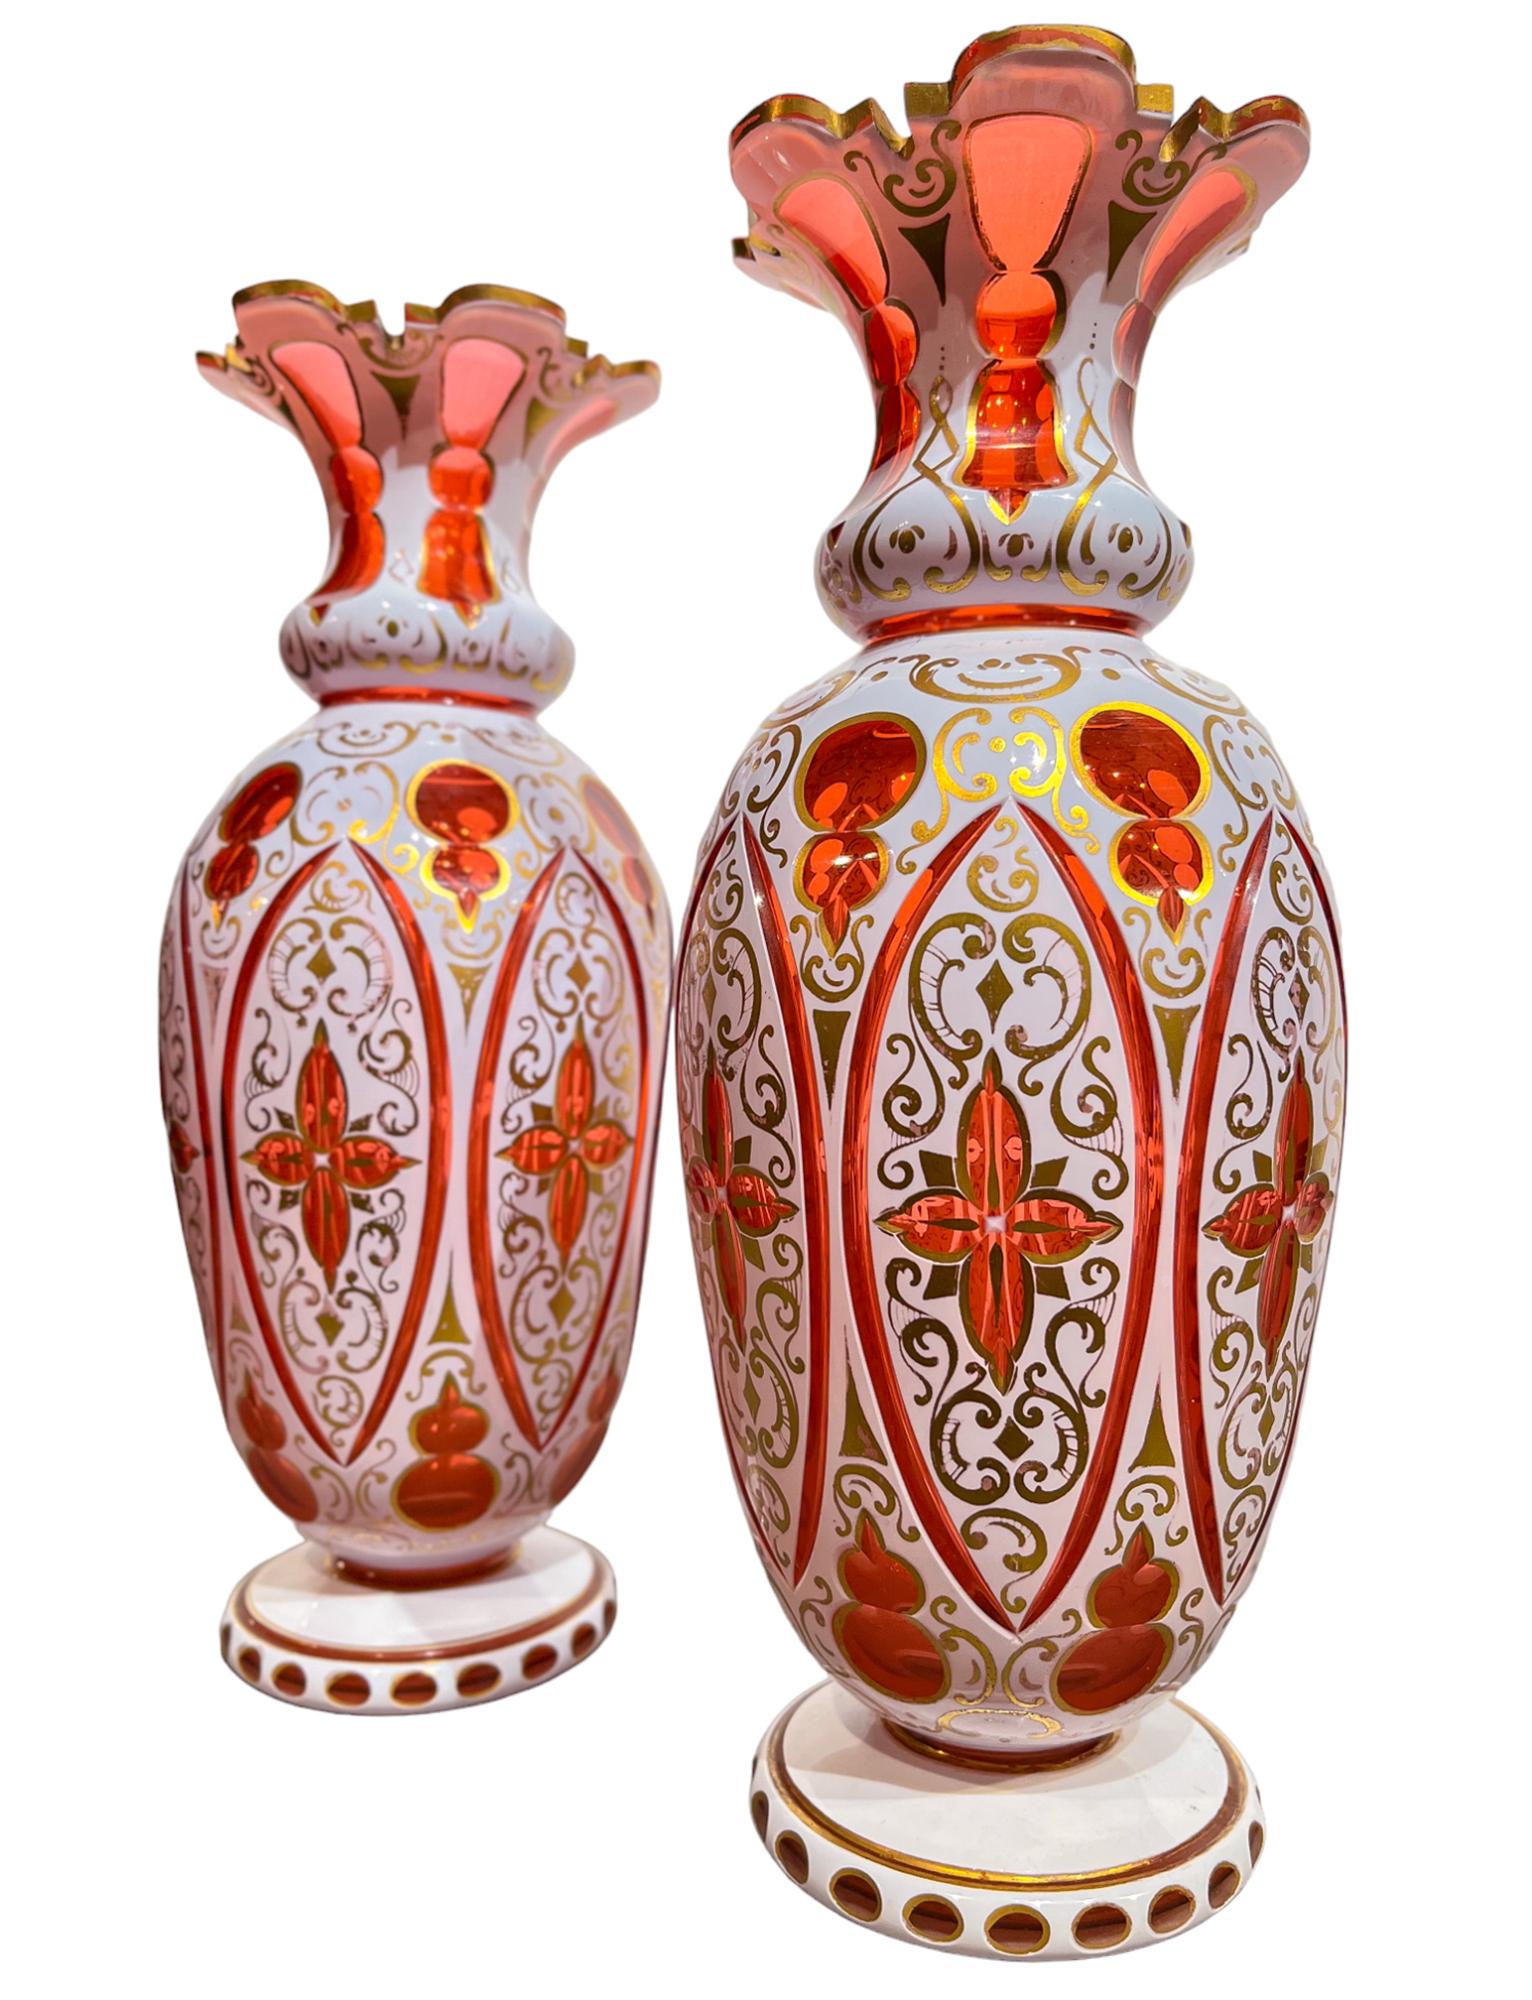 A fabulous pair of antique handmade Bohemian overlay glass vases in cherry and white. The glass overlay has been sliced into to create a gorgeous lace like pattern. Ornamented with gold paint that weaves between the elegantly sliced pattern,